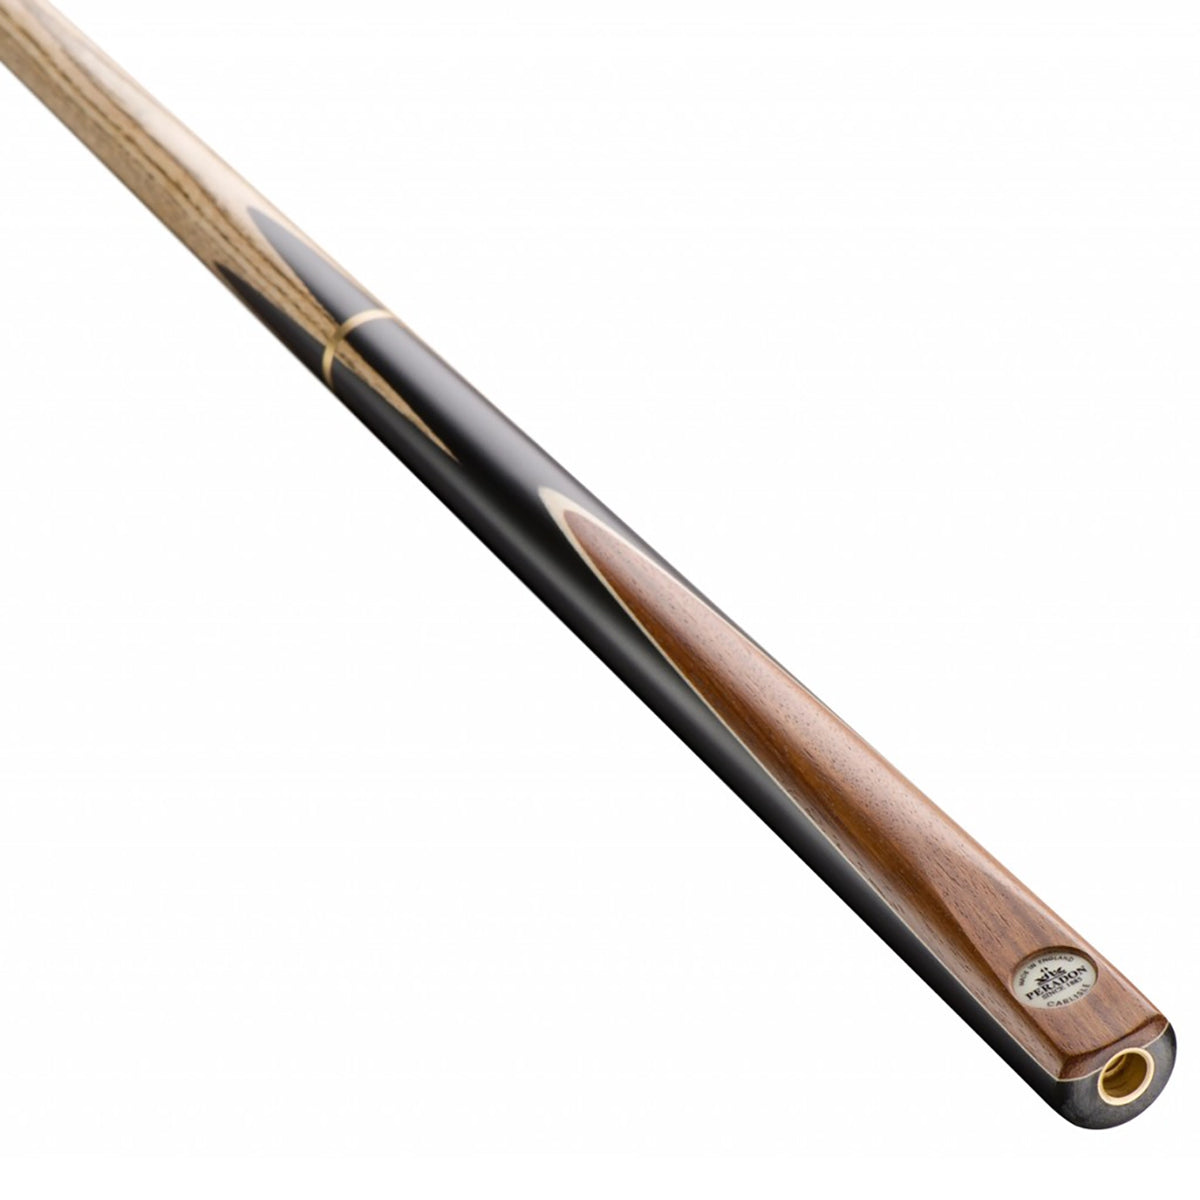 Peradon Carlisle 3/4 Jointed Snooker Cue. On Angle view